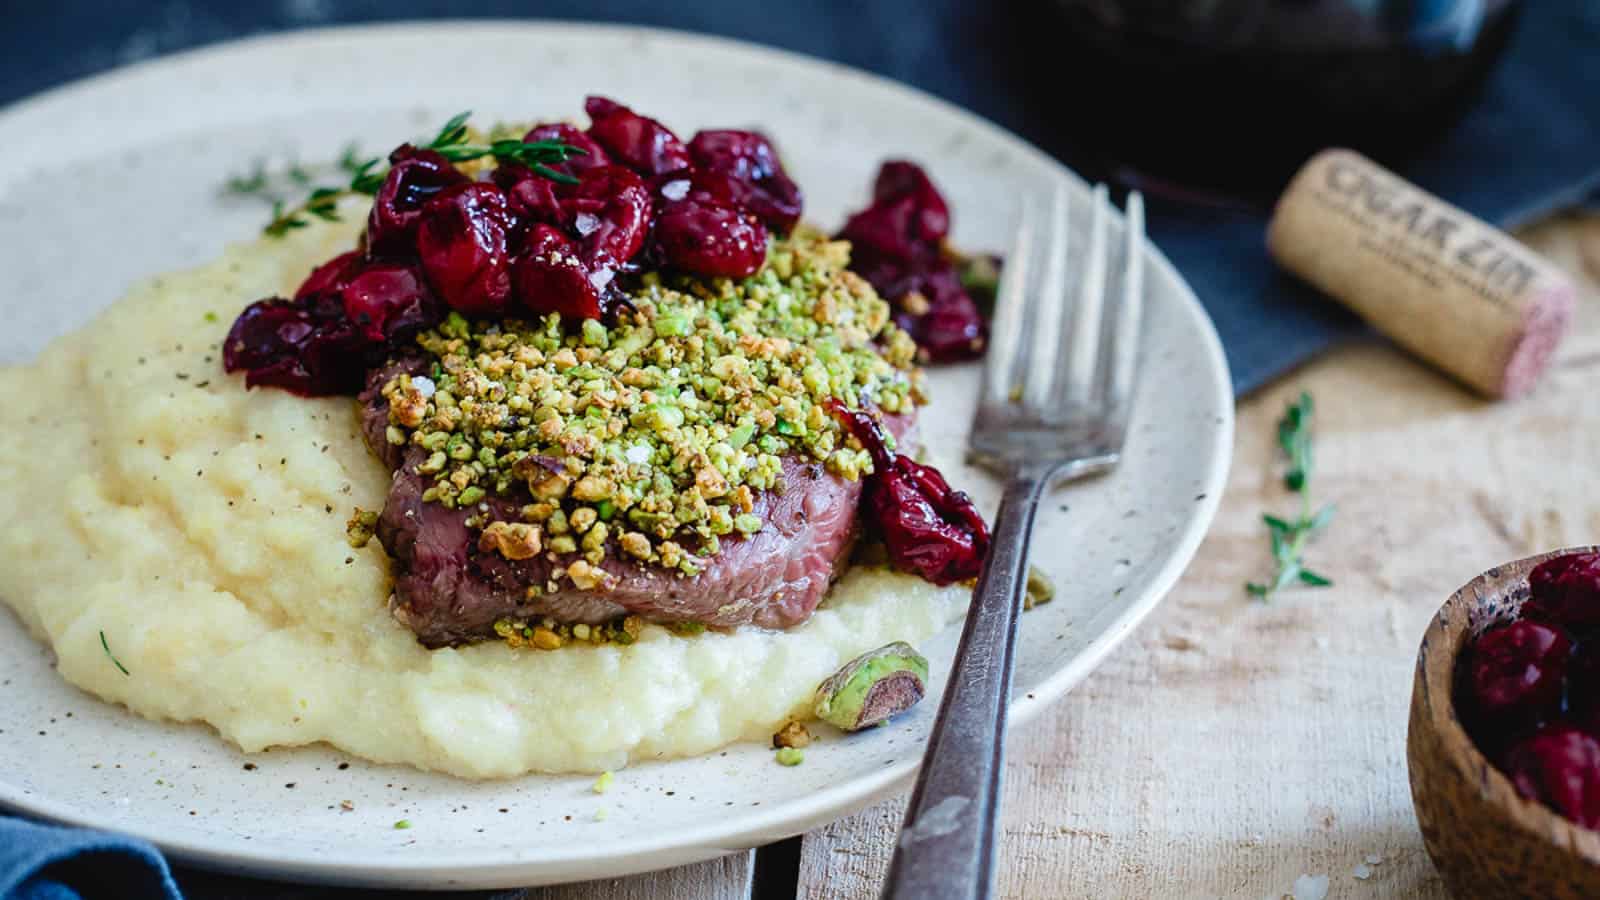 Pistachio crusted lamb chops served over mashed potatoes with cherry sauce.